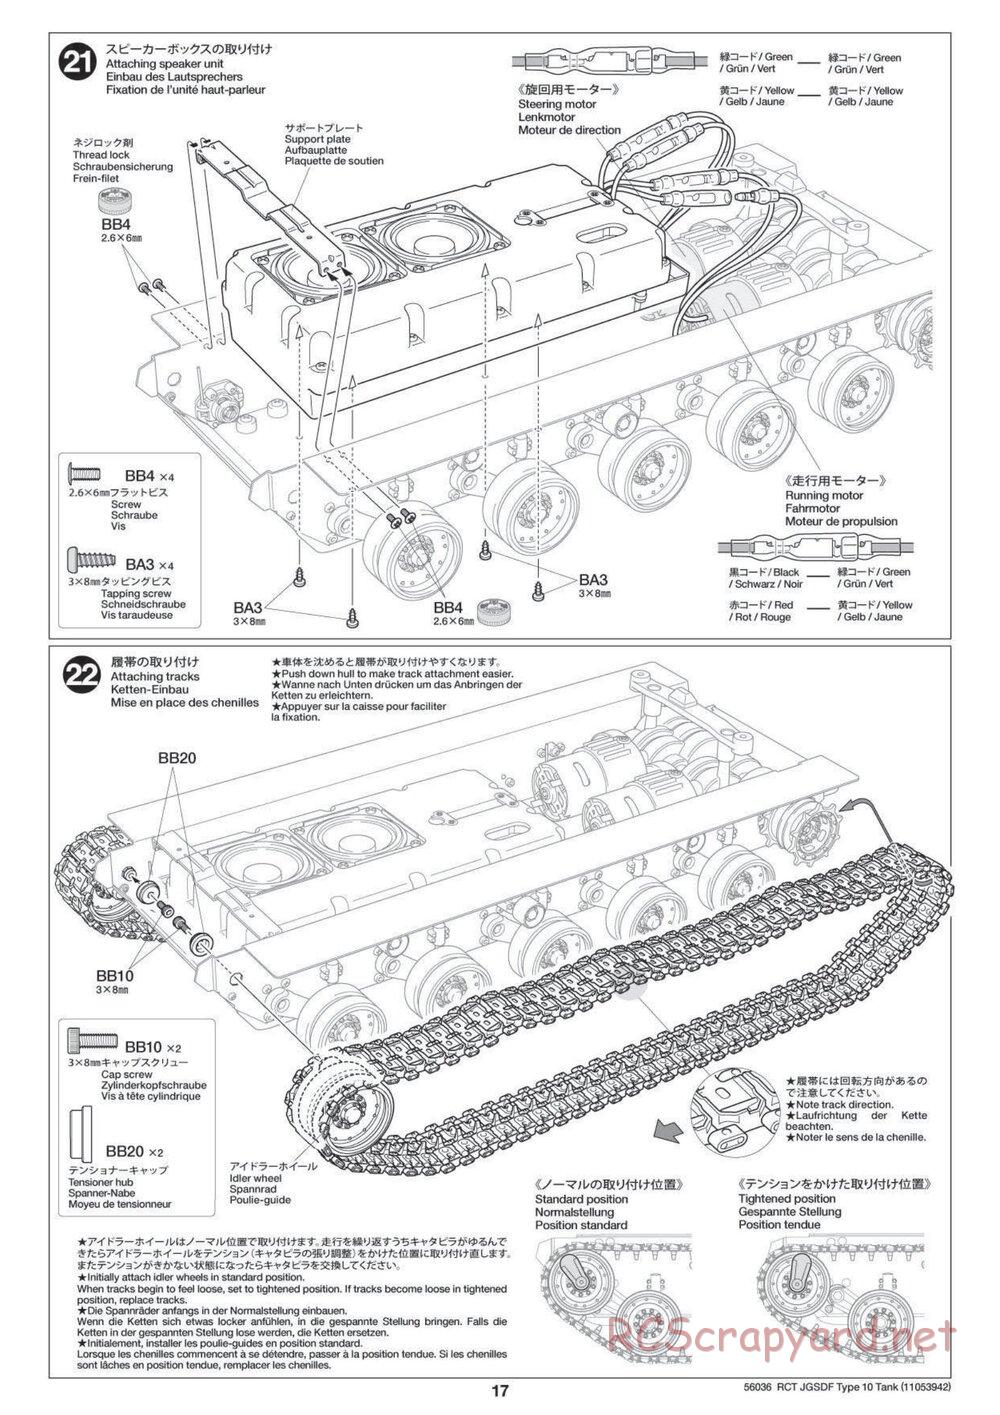 Tamiya - JGSDF Type 10 Tank - 1/16 Scale Chassis - Manual - Page 17